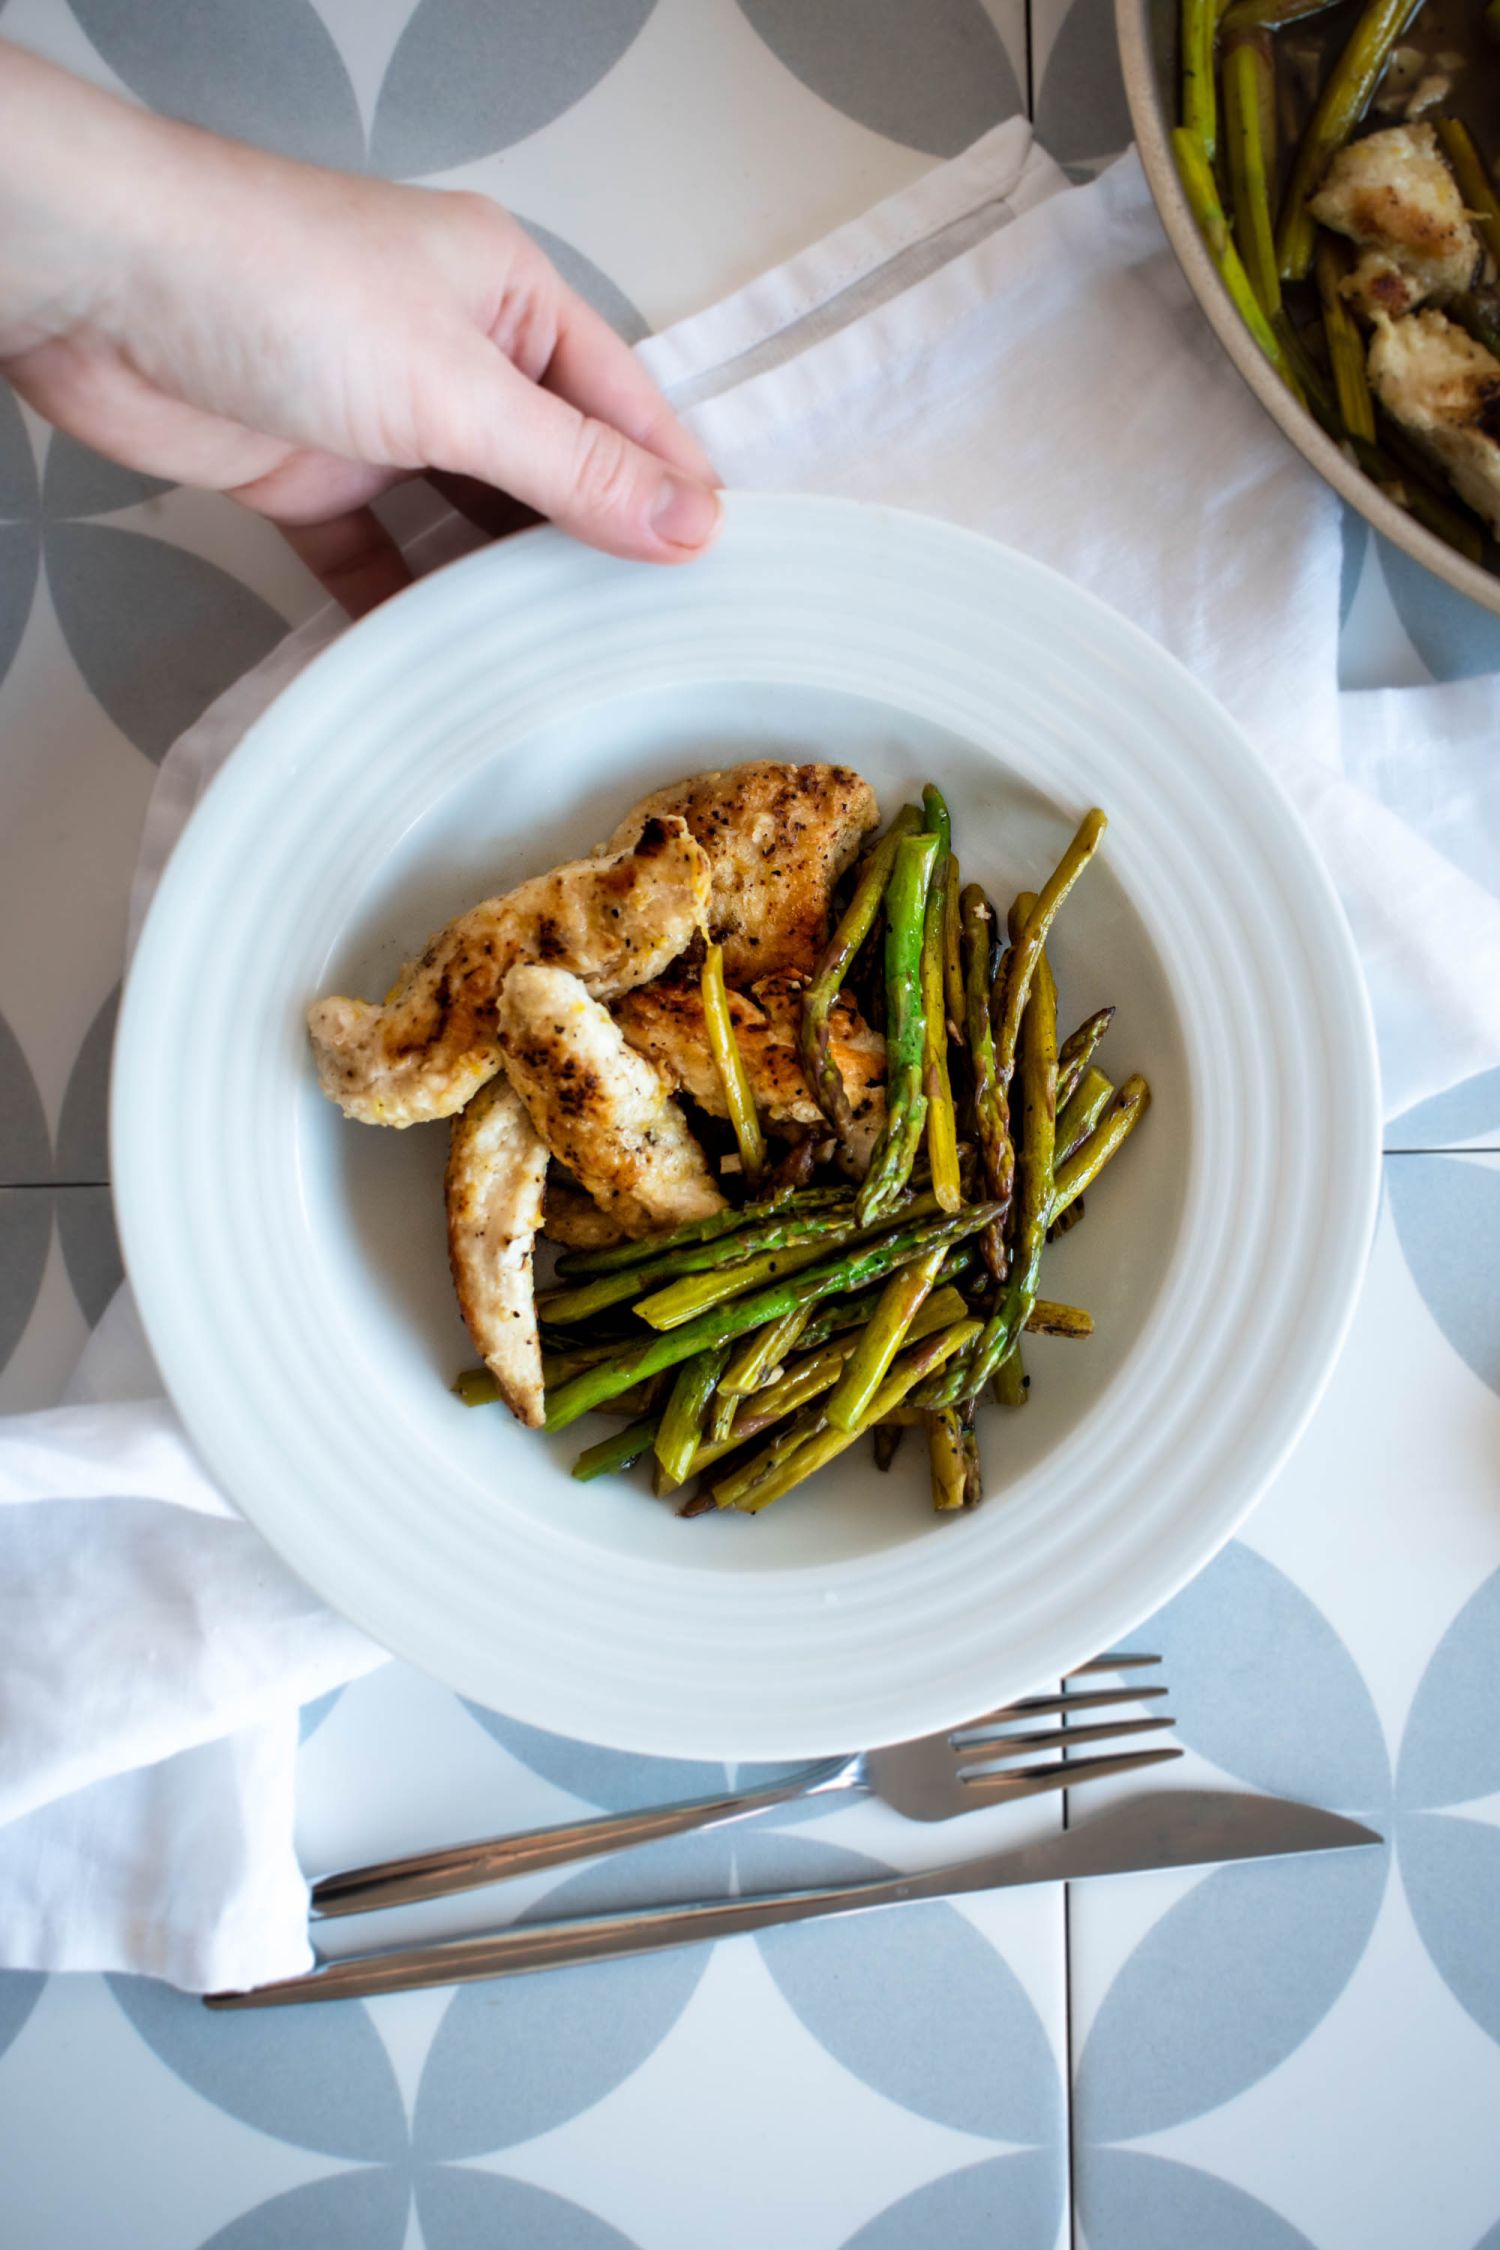 Chicken and asparagus in a lemon garlic sauce served on a plate with a fork and knife on the side.